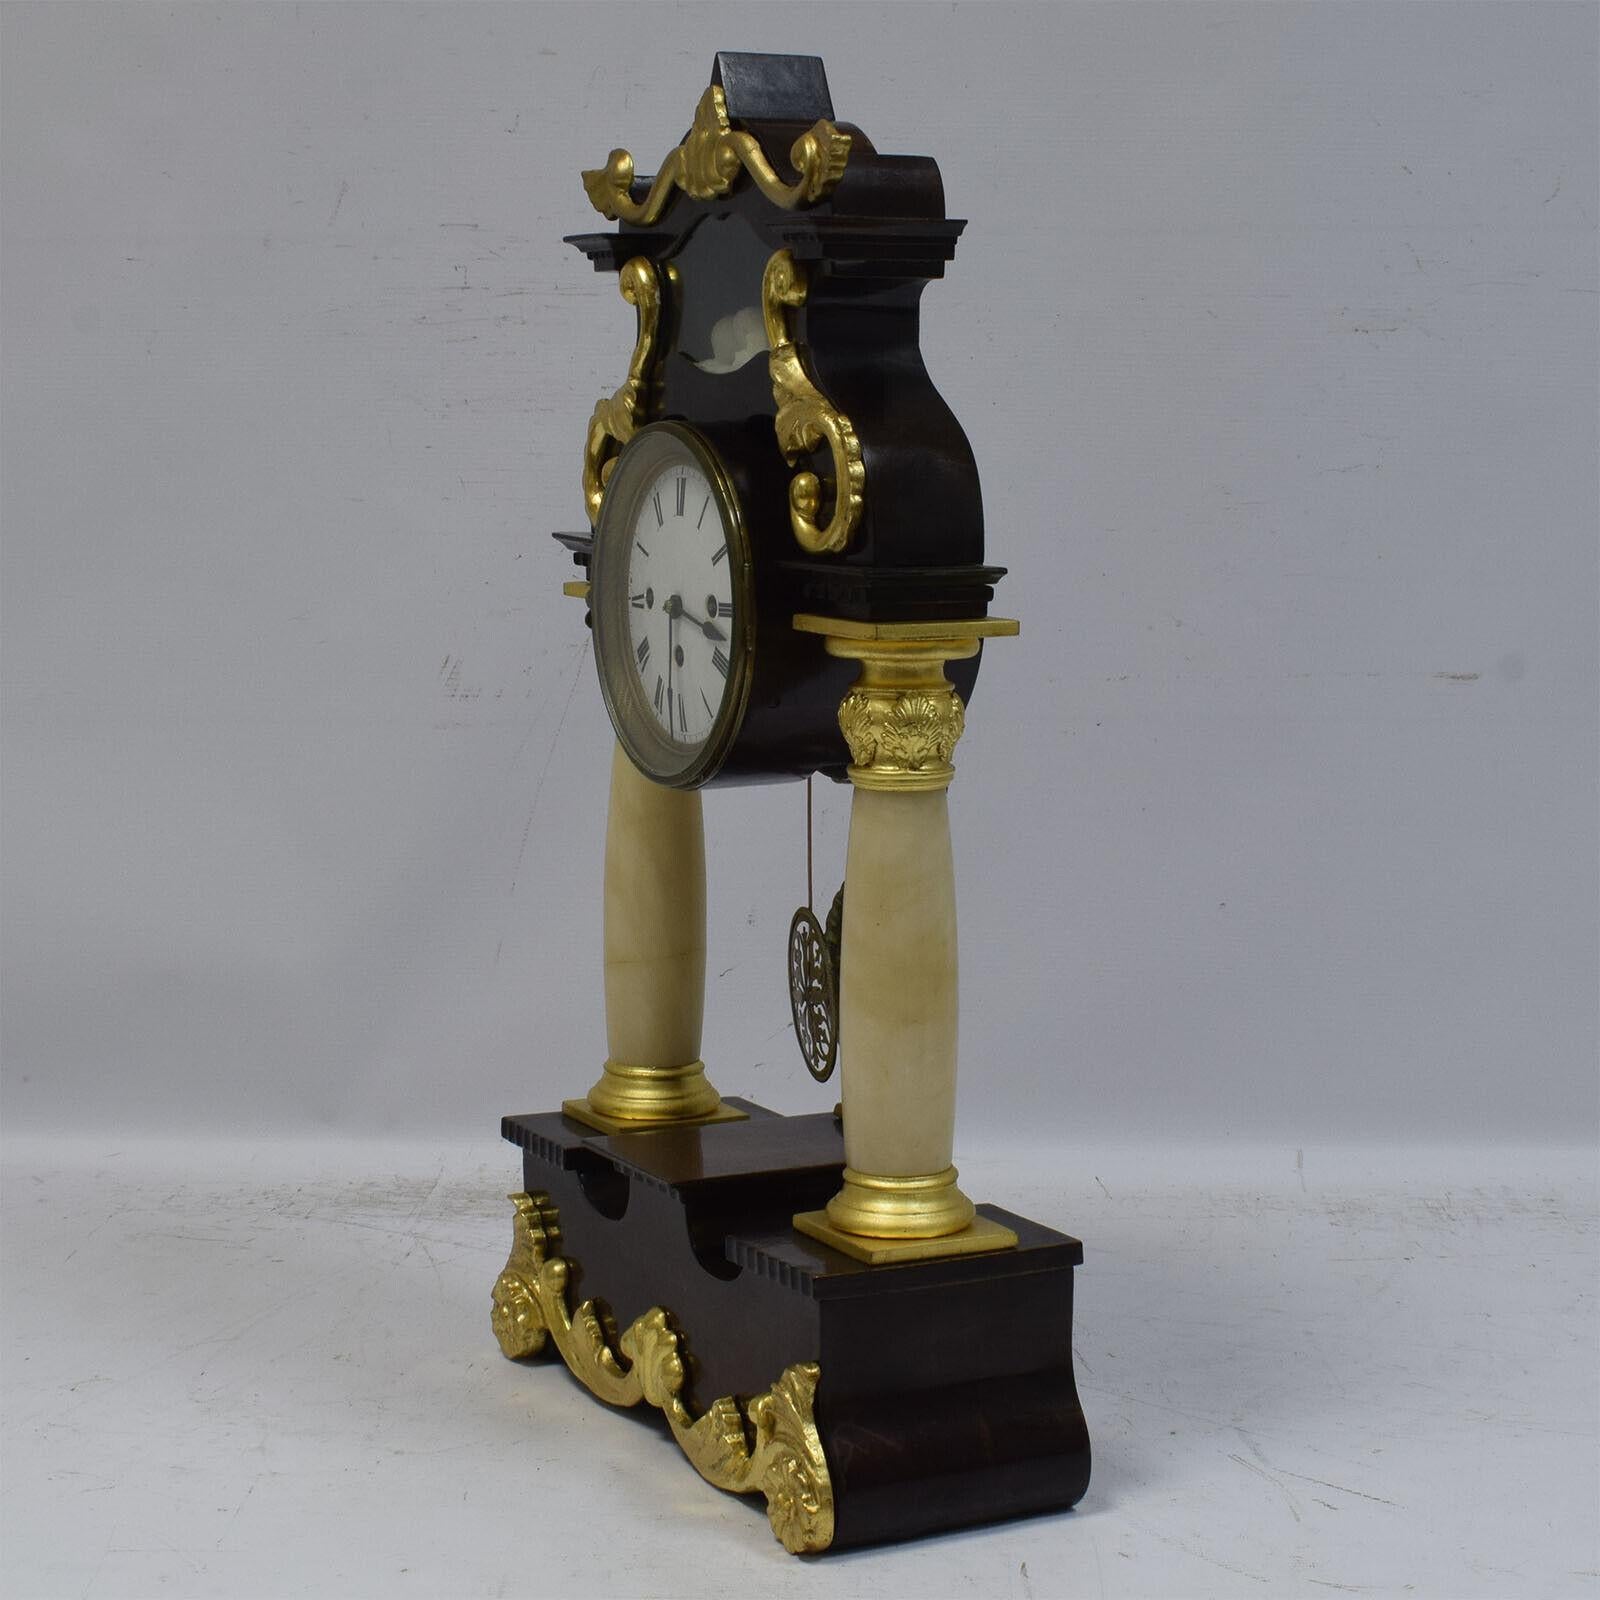 Introducing this exquisite 19th-century functional column clock, a true testament to the elegance of the era. Standing at a height of 61 cm, this antique mantel clock features a portico supported by two white alabaster columns, creating a striking